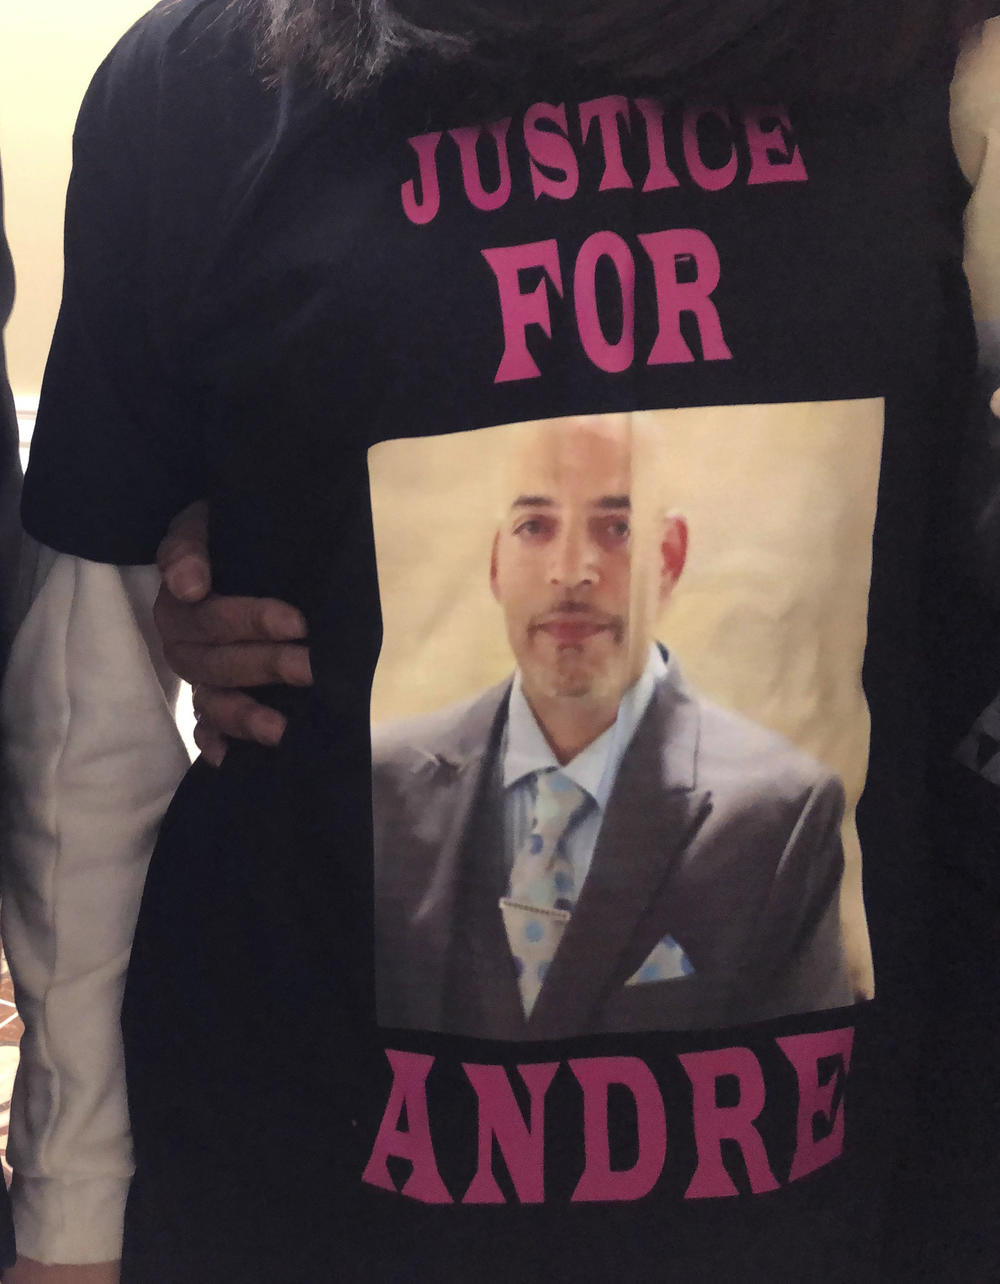 Andre Hill, fatally shot by Columbus Police on Dec. 22, is memorialized on a shirt worn by his daughter, Karissa Hill, in Columbus, Ohio, on Dec. 31.